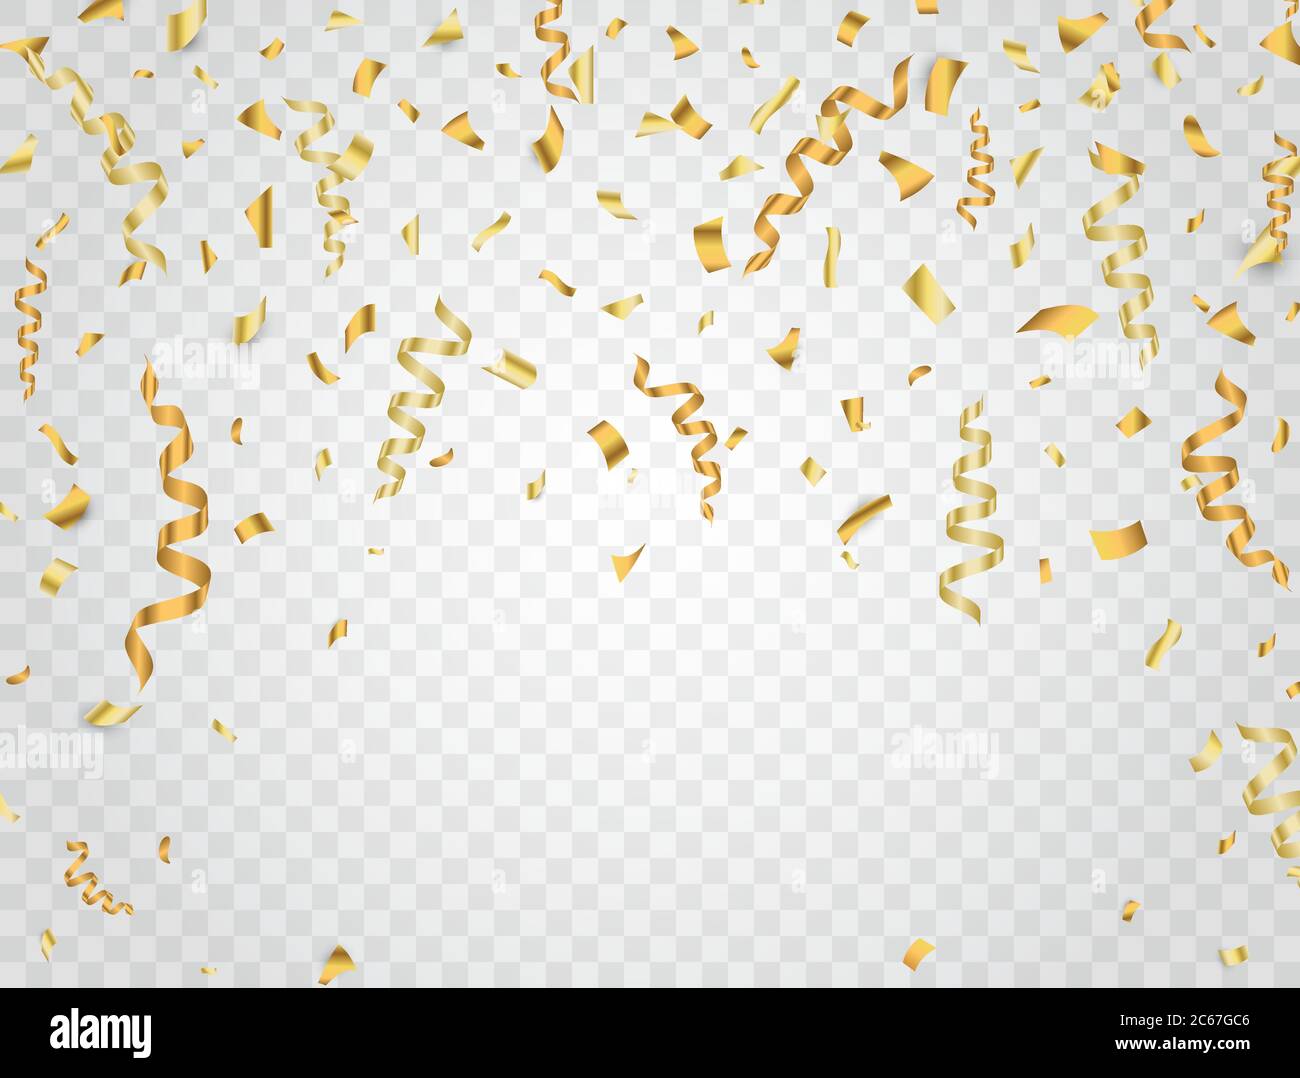 Party background with gold confetti. Celebration background. Vector illustration. Stock Vector